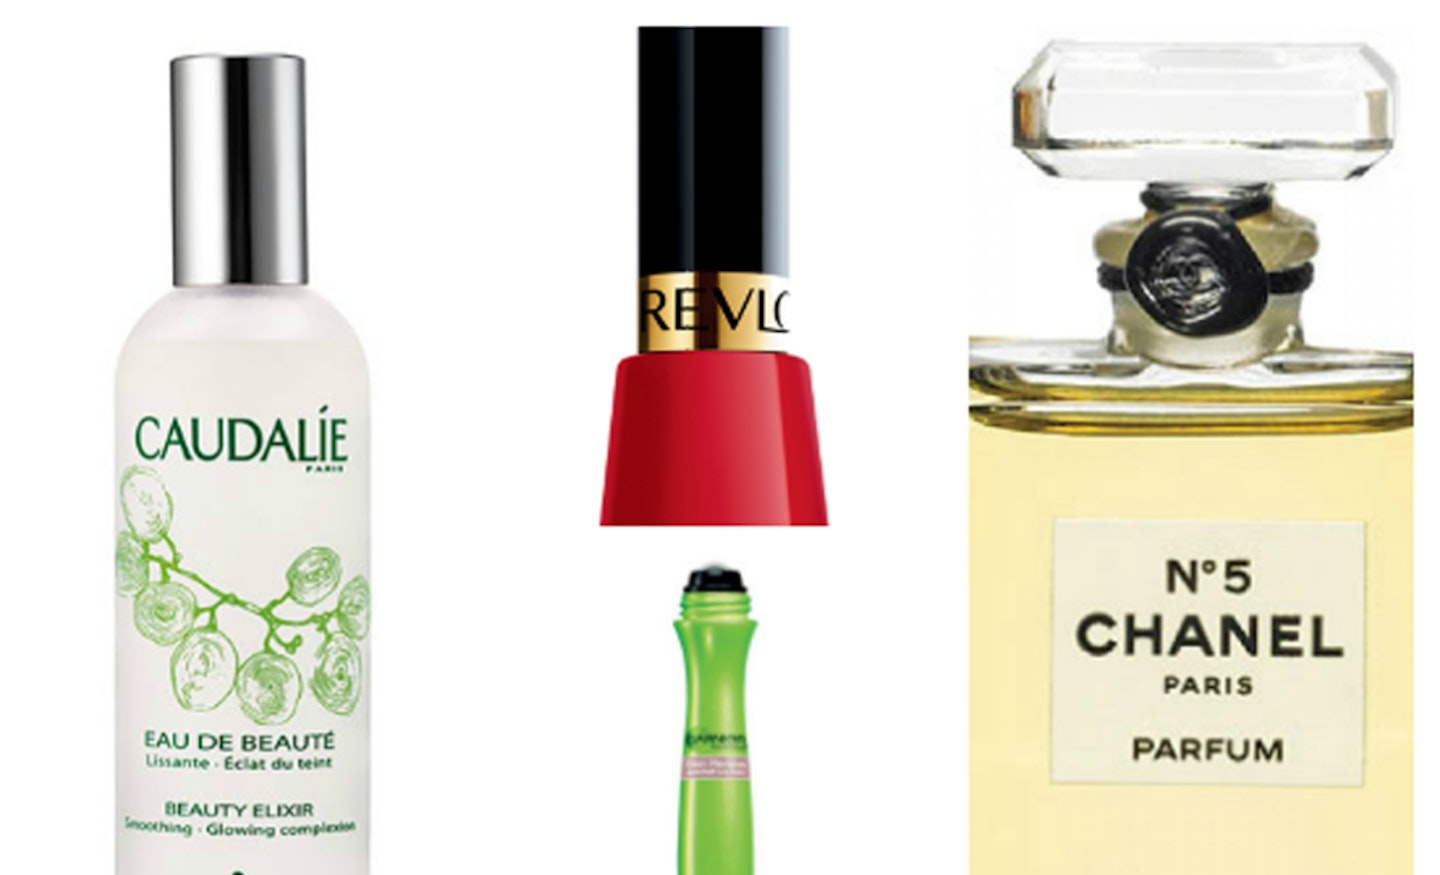 GALLERY>> THE BEAUTY PRODUCTS TO KEEP IN YOUR FRIDGE